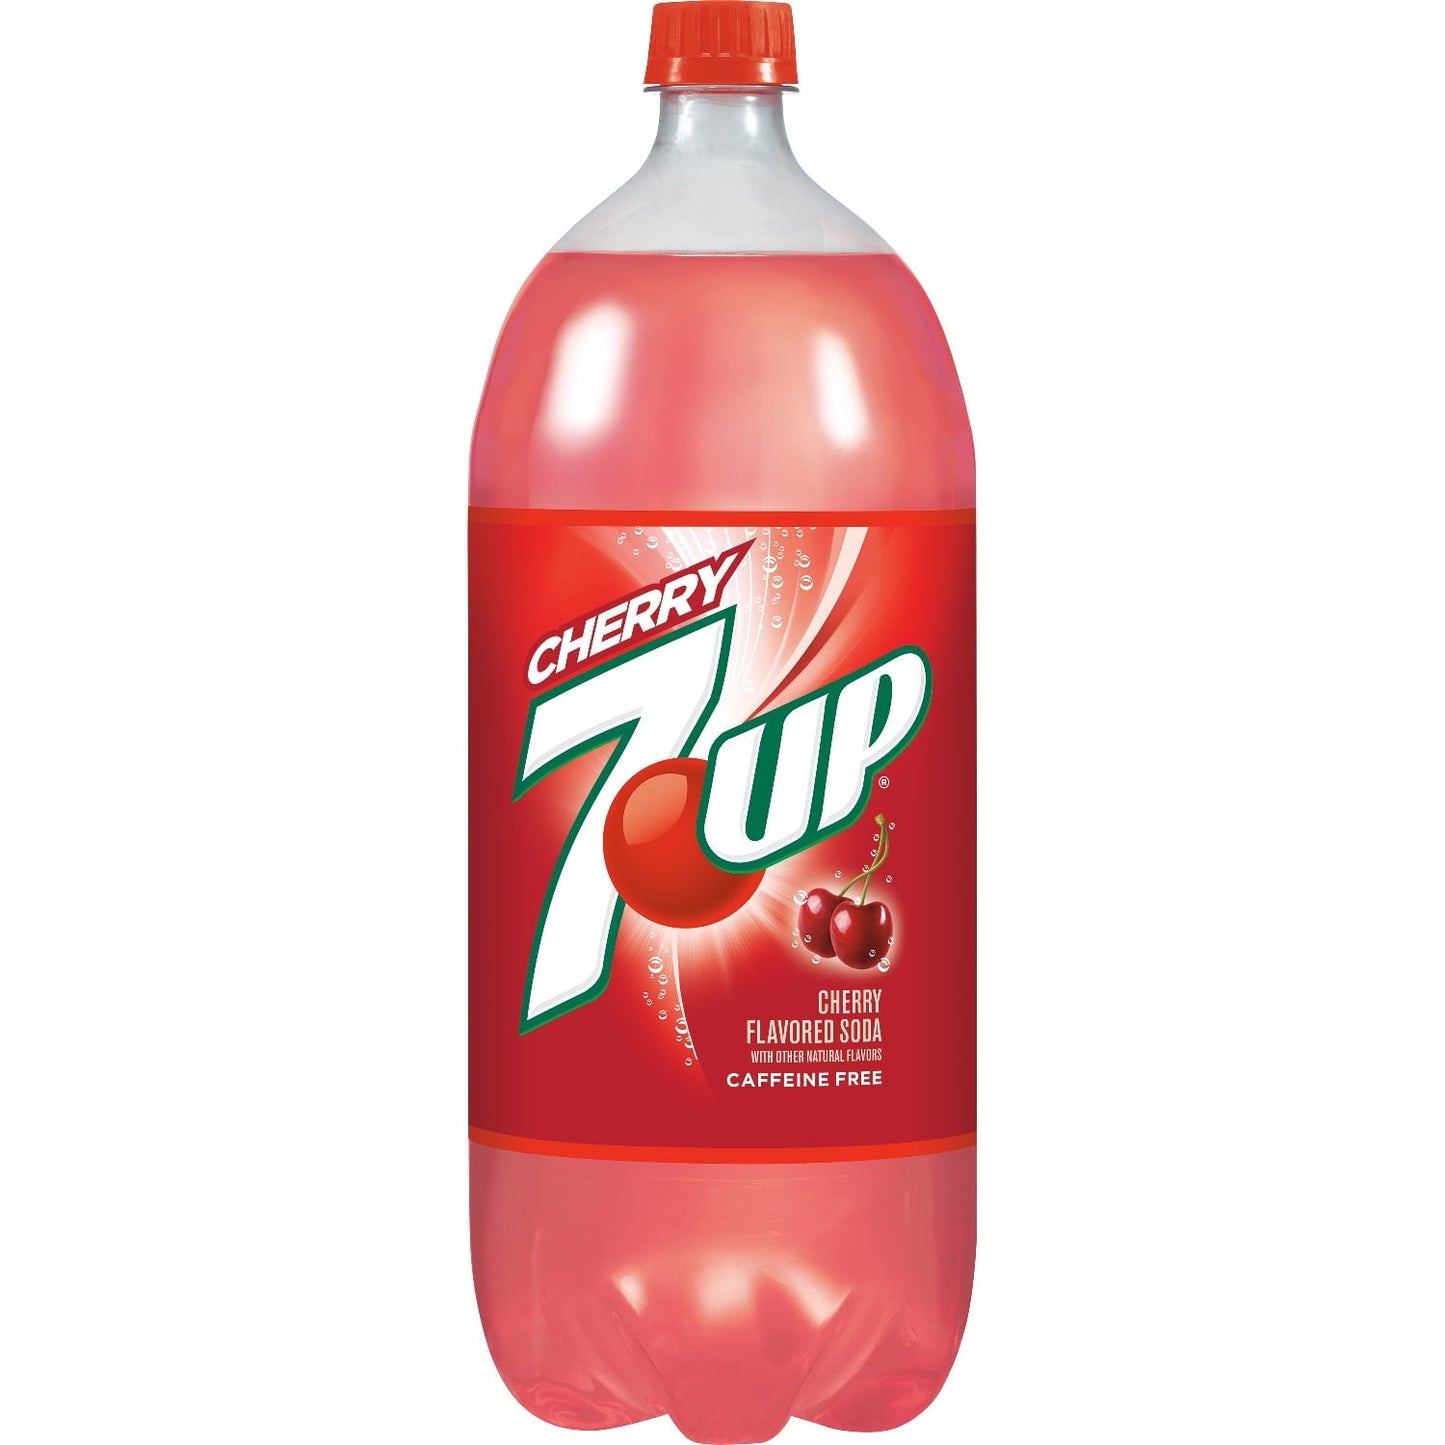 7UP Cherry Flavored Soda, 2 L bottle